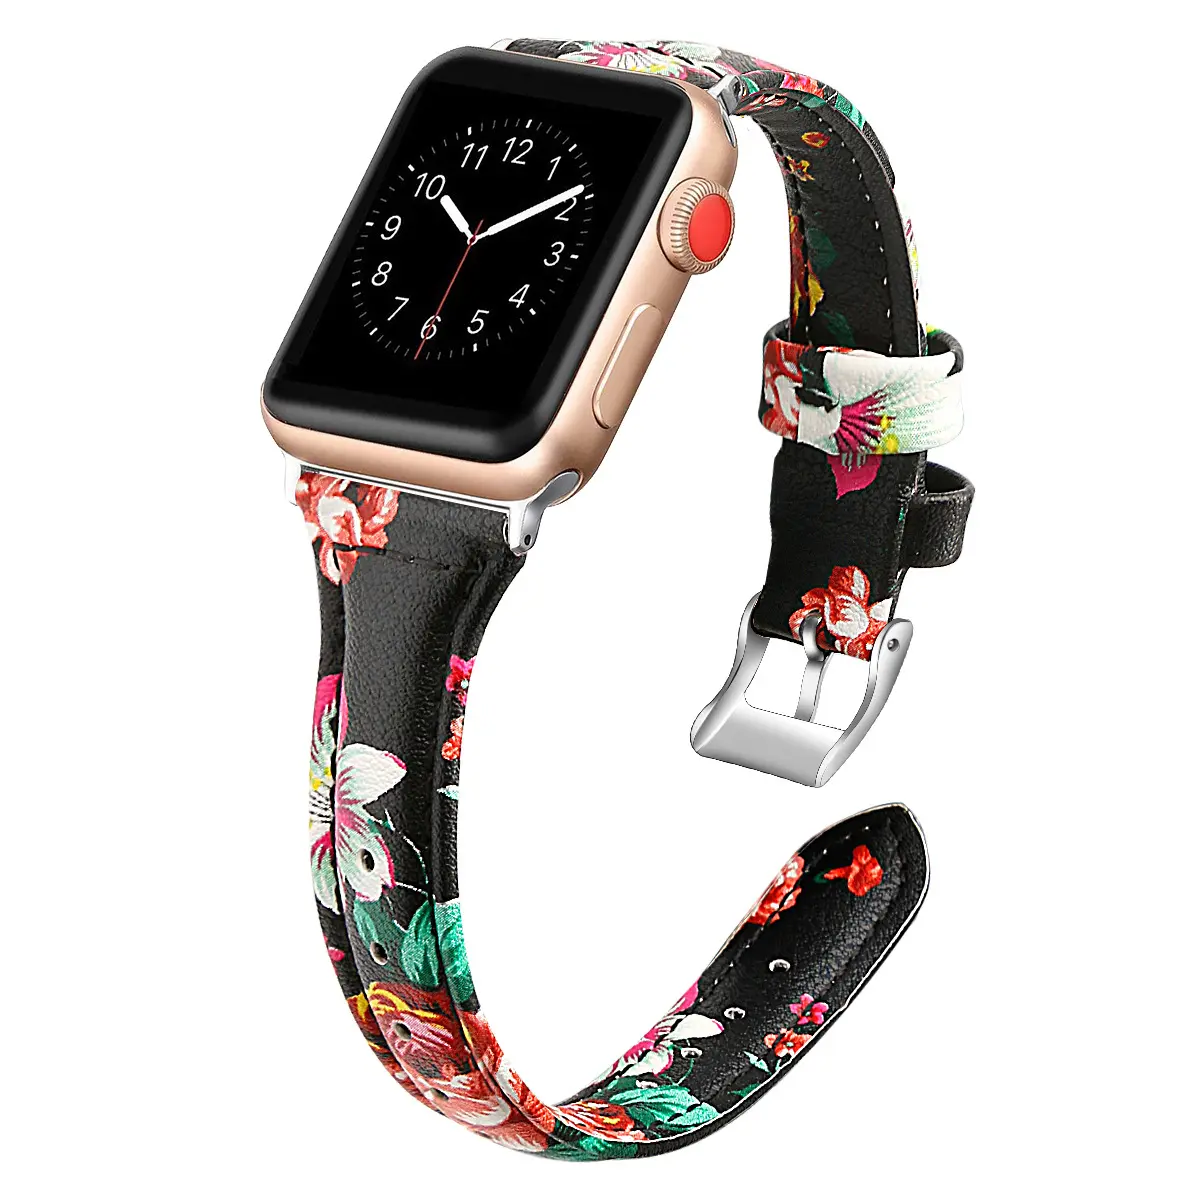 New hot For Apple Watch Band For Apple Watch Strap Leather Band Smart Watch Band Accessories 38mm 42mm